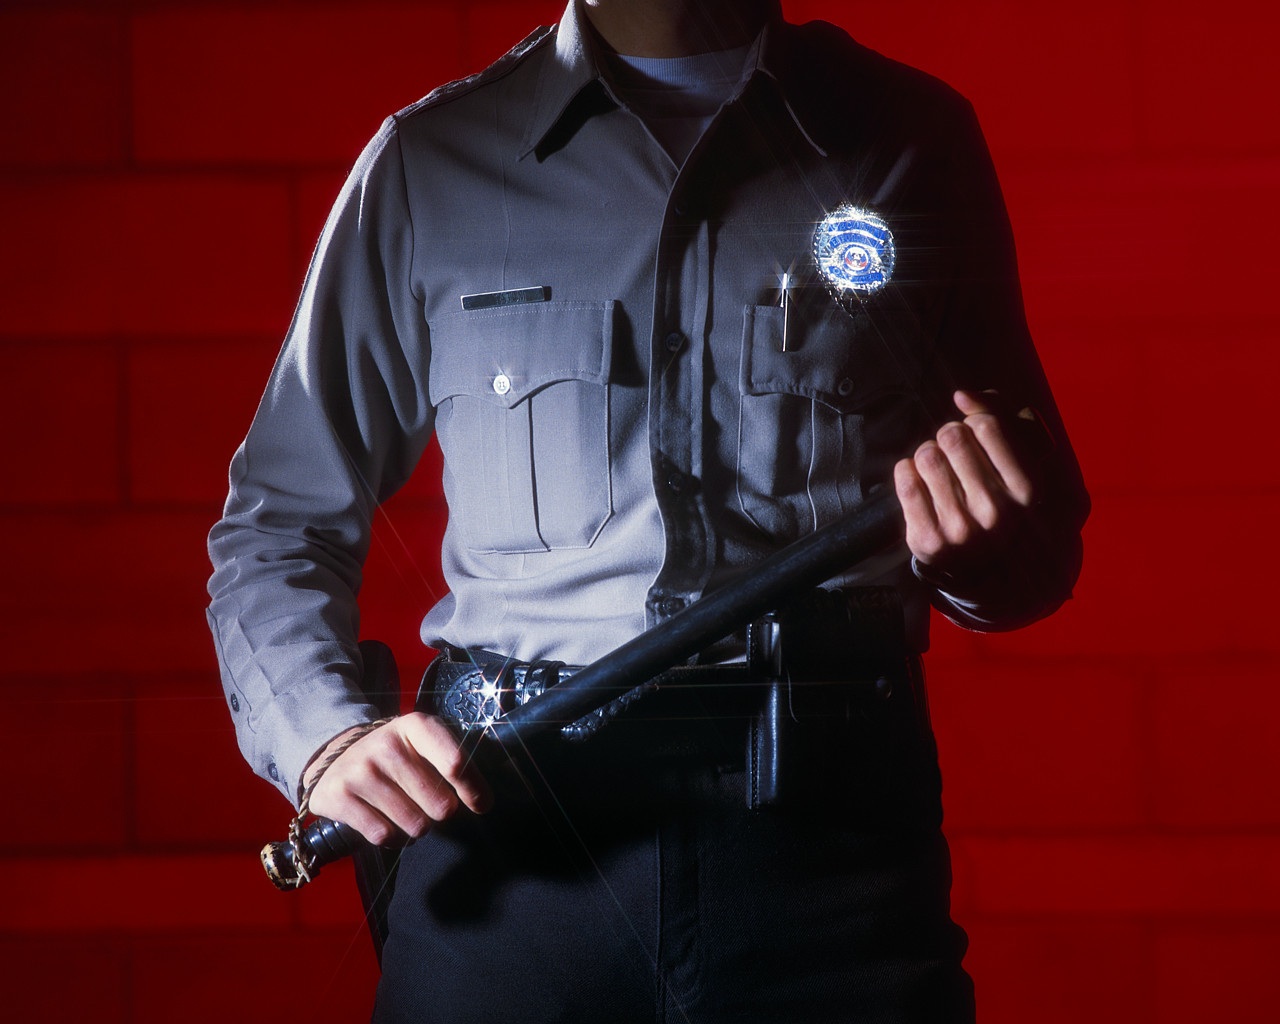 Police Officer Carrying Nightstick